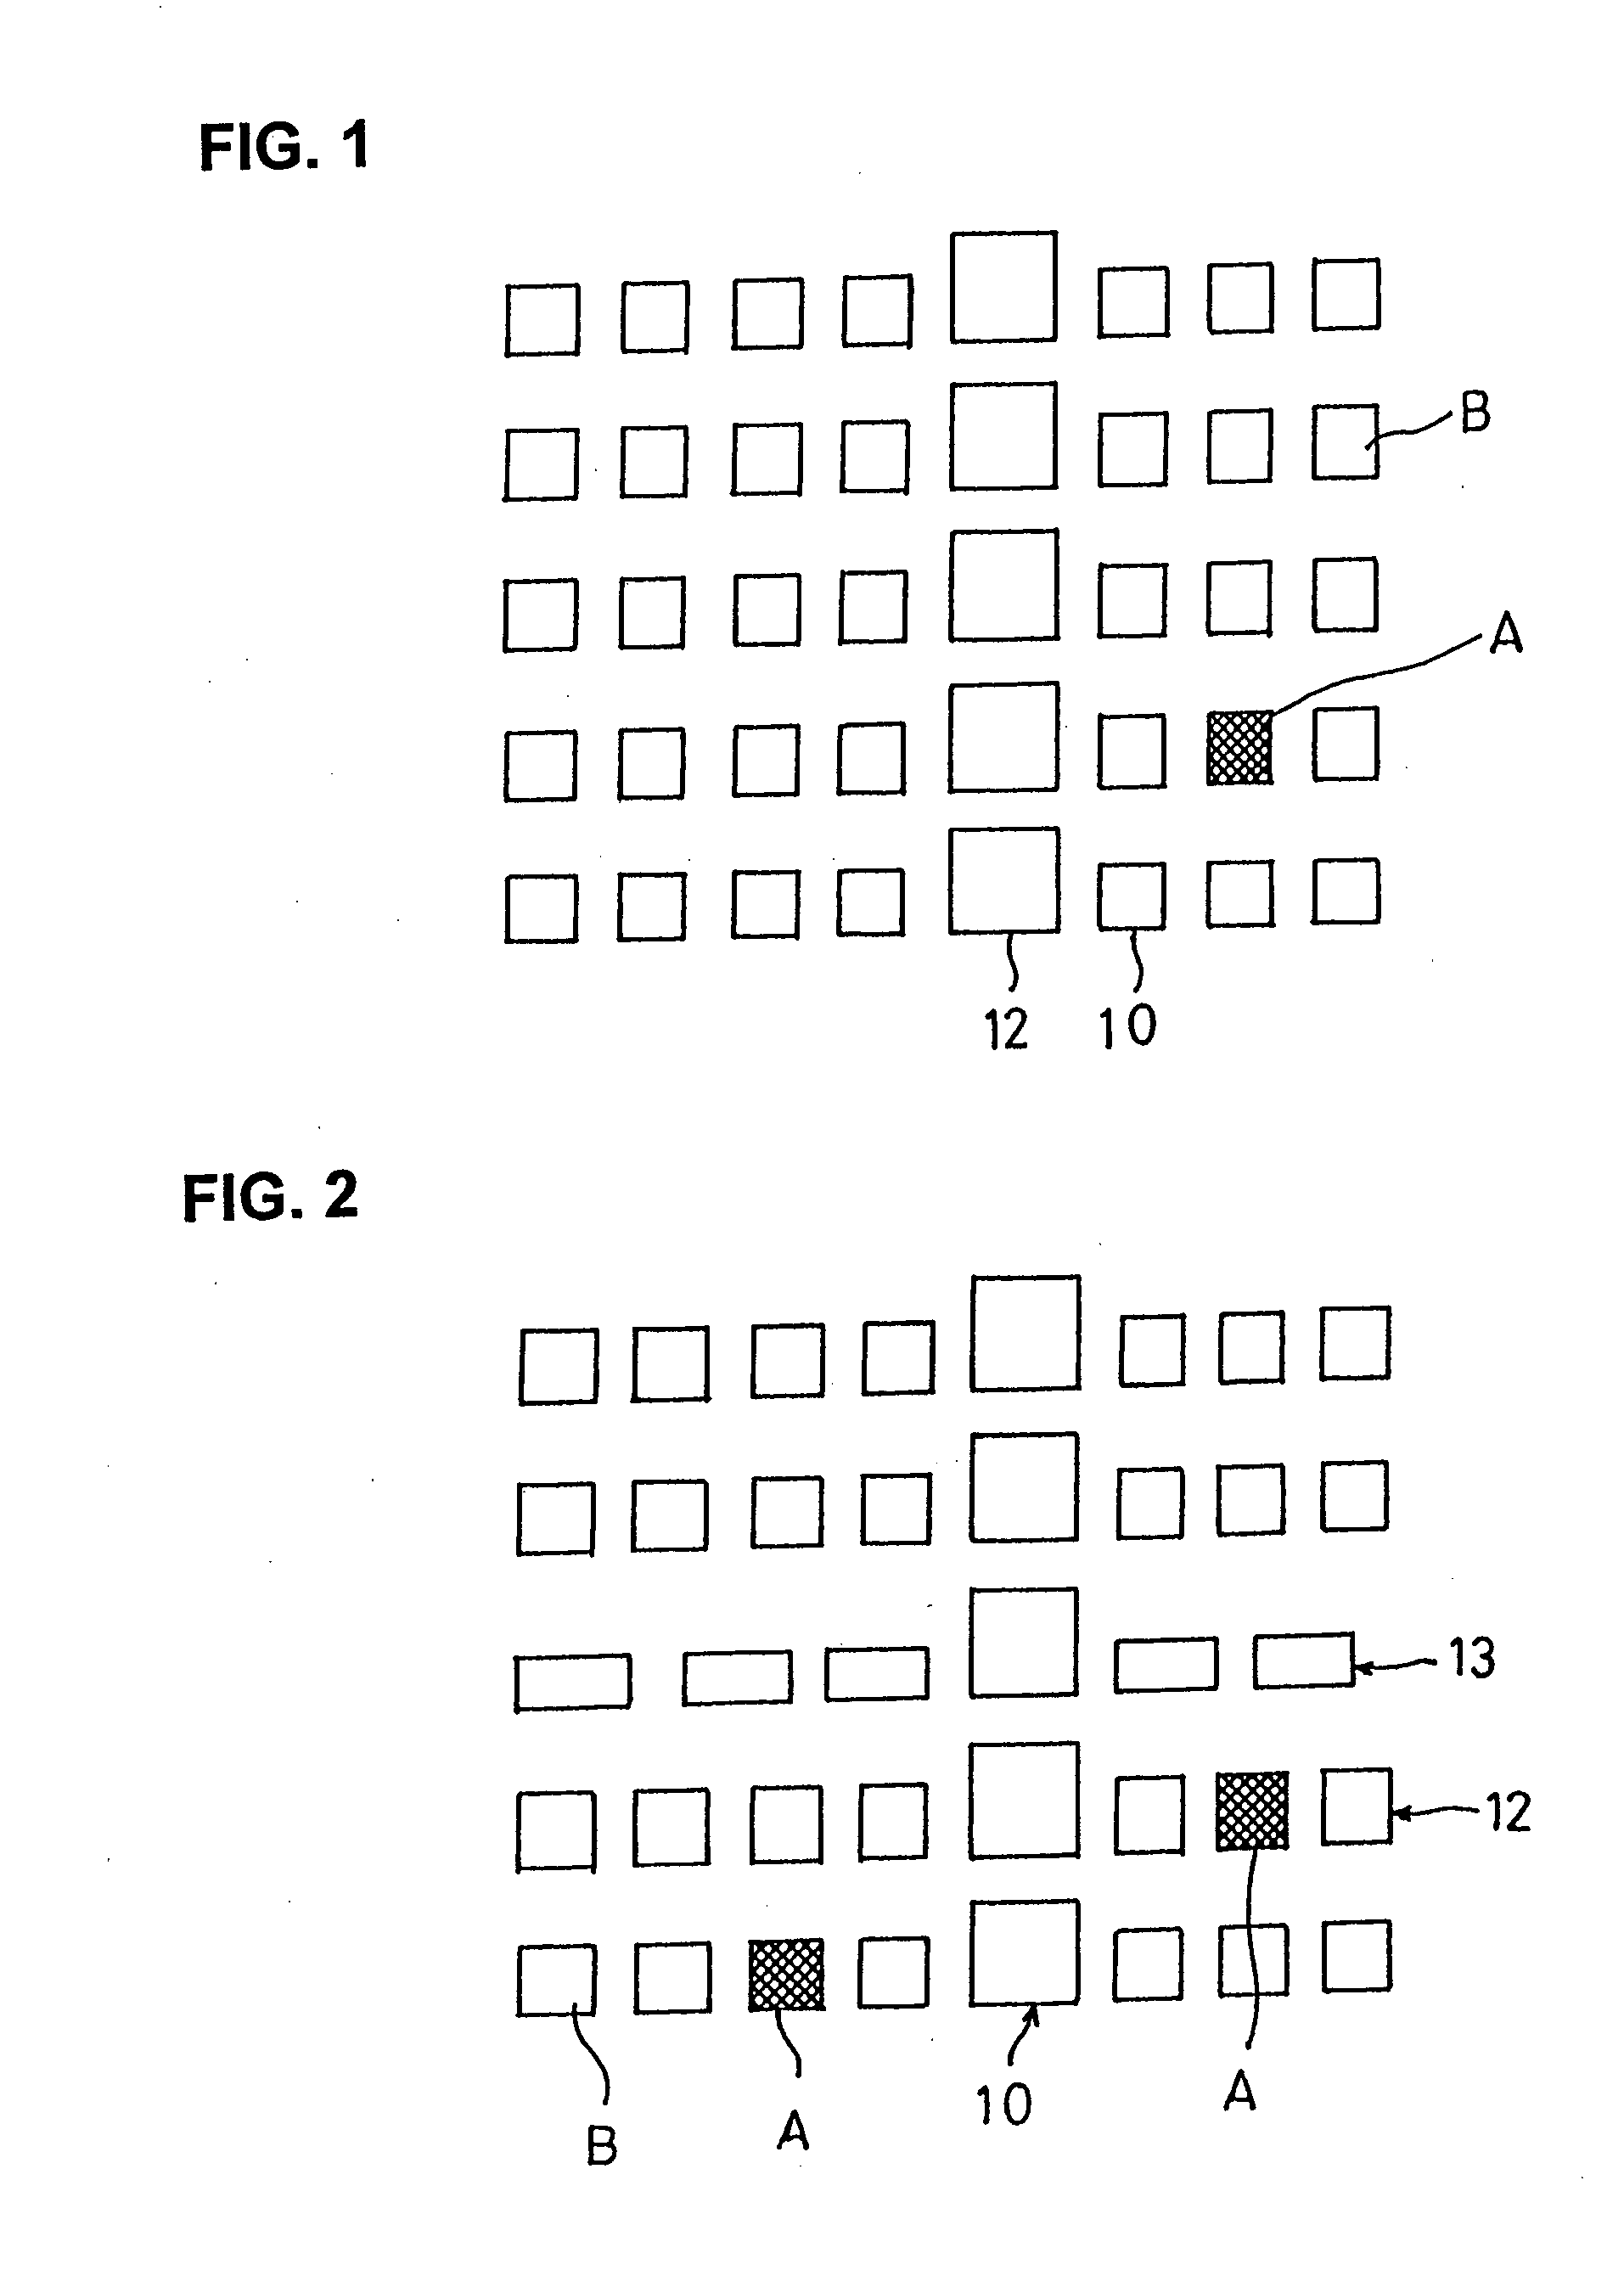 Mutual for reporting a theft in an authentication system